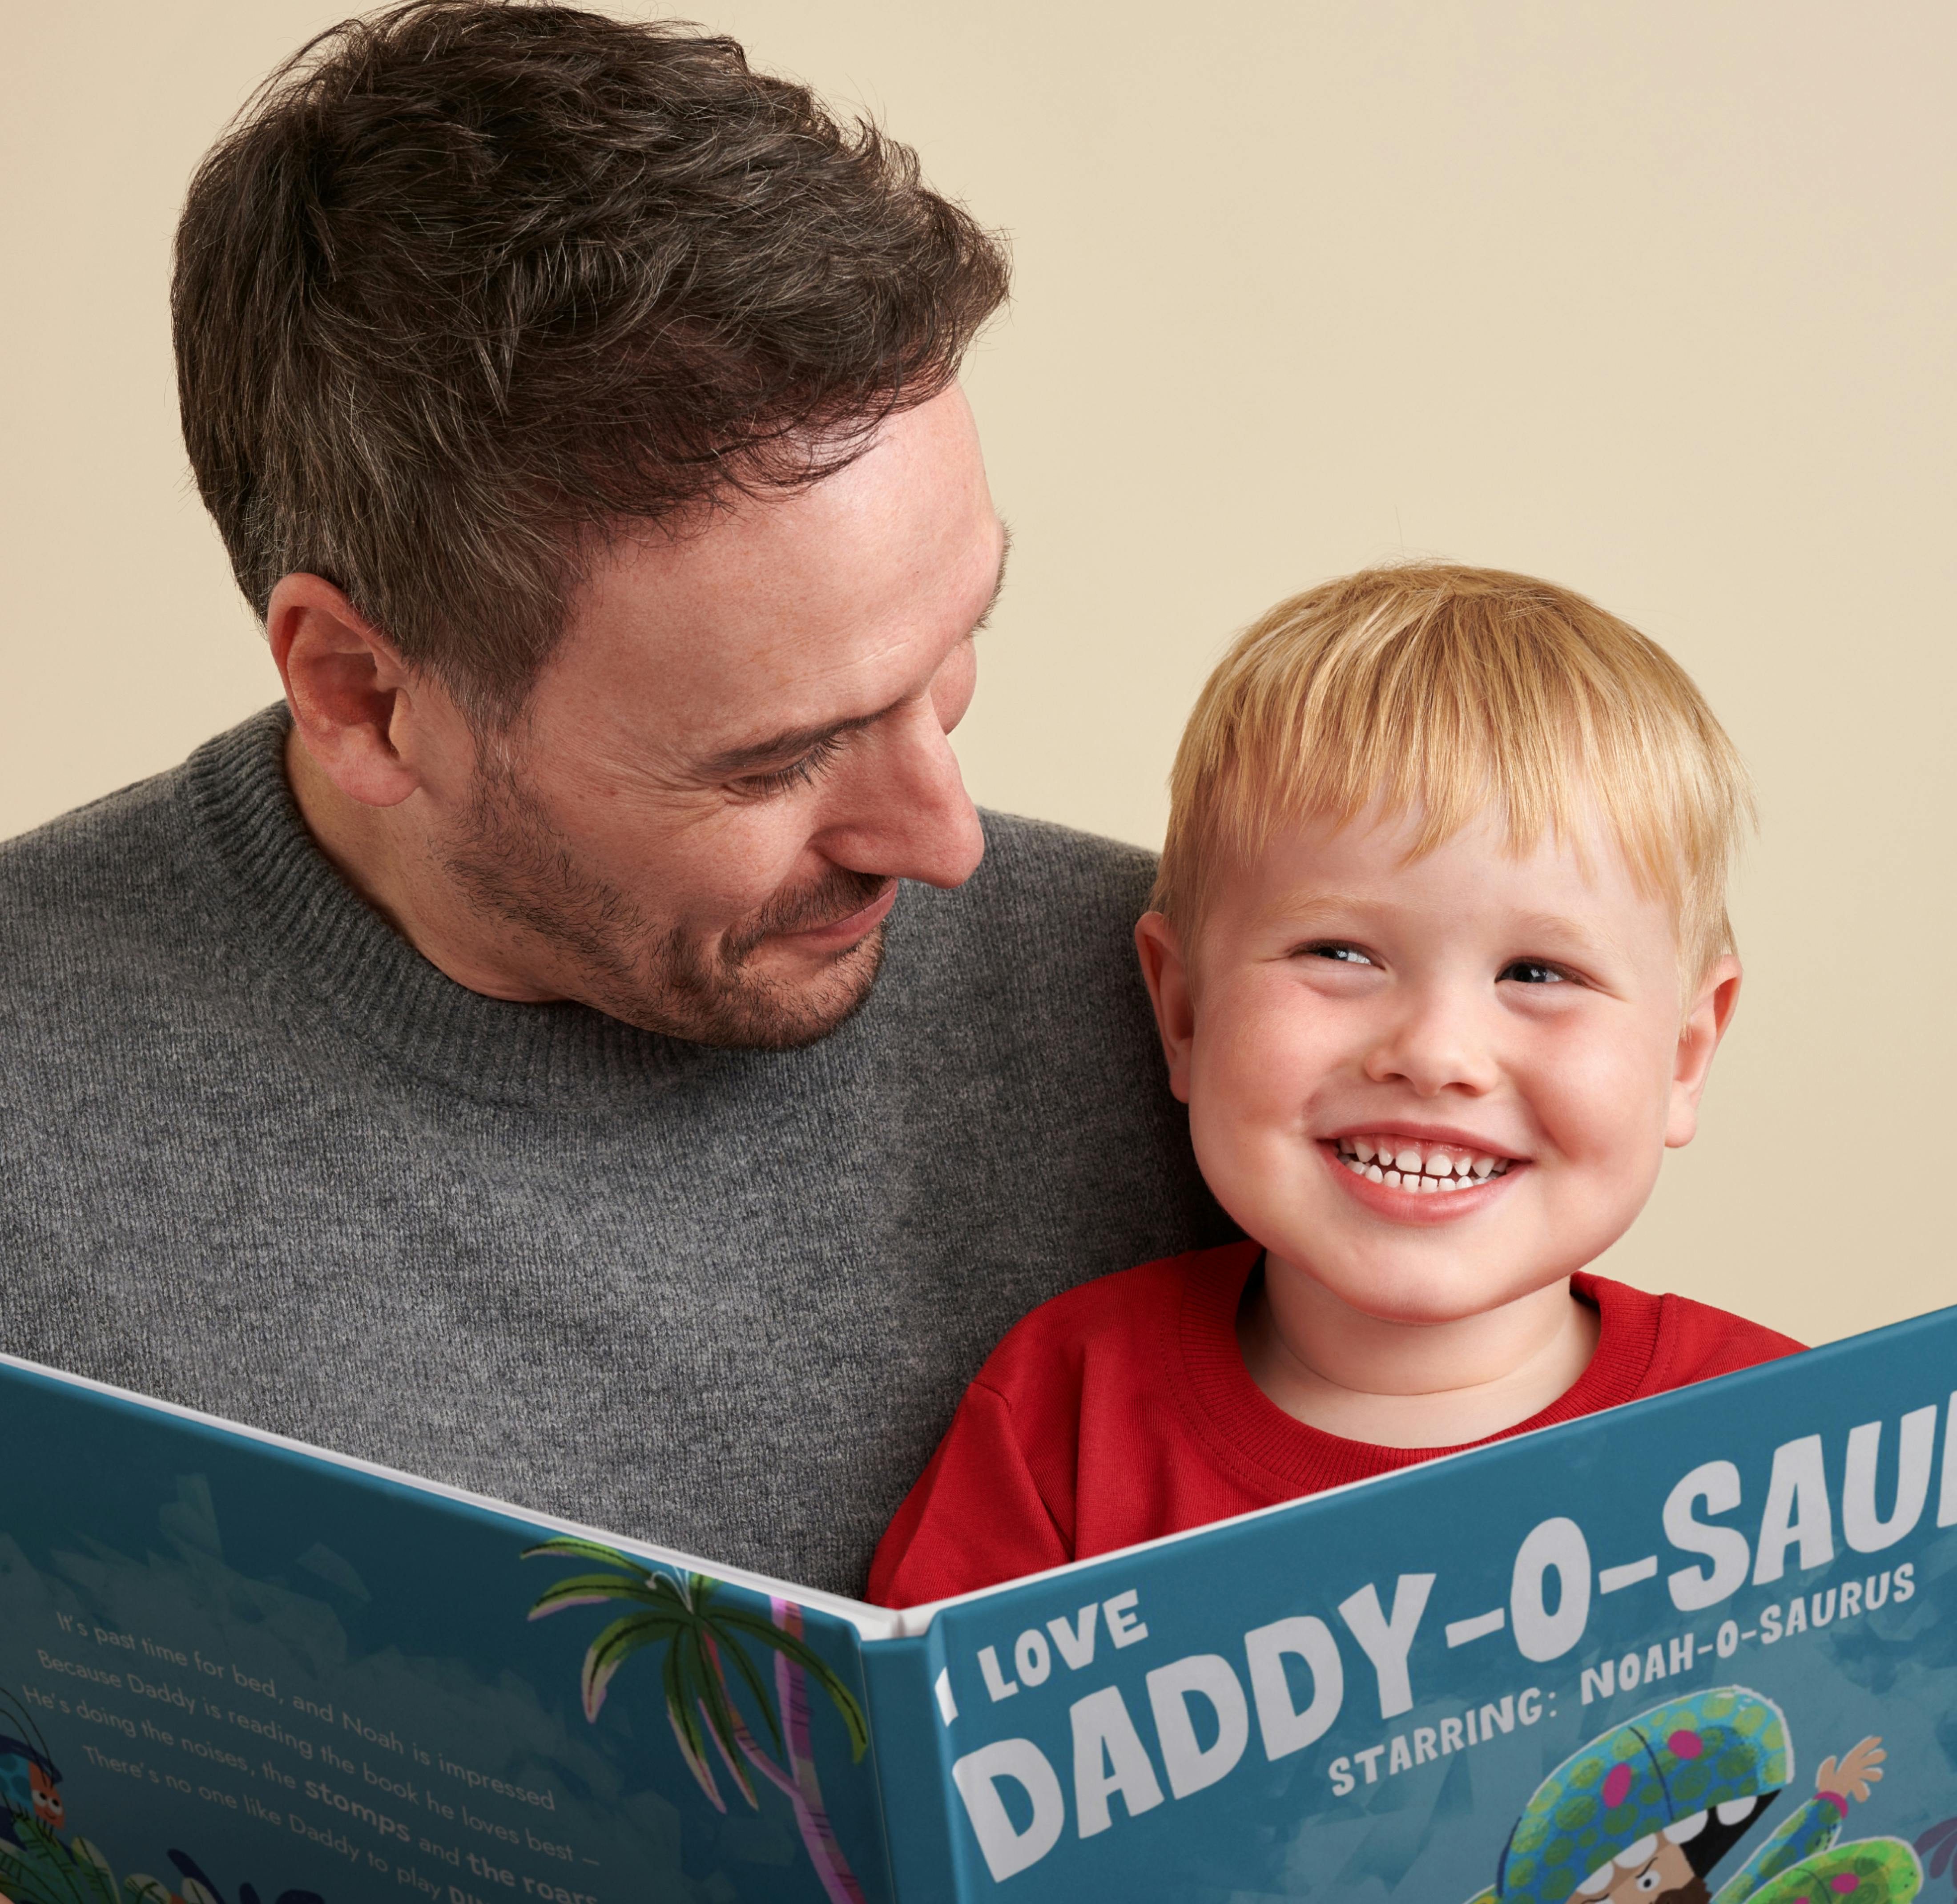 A child and father reading the personalised book